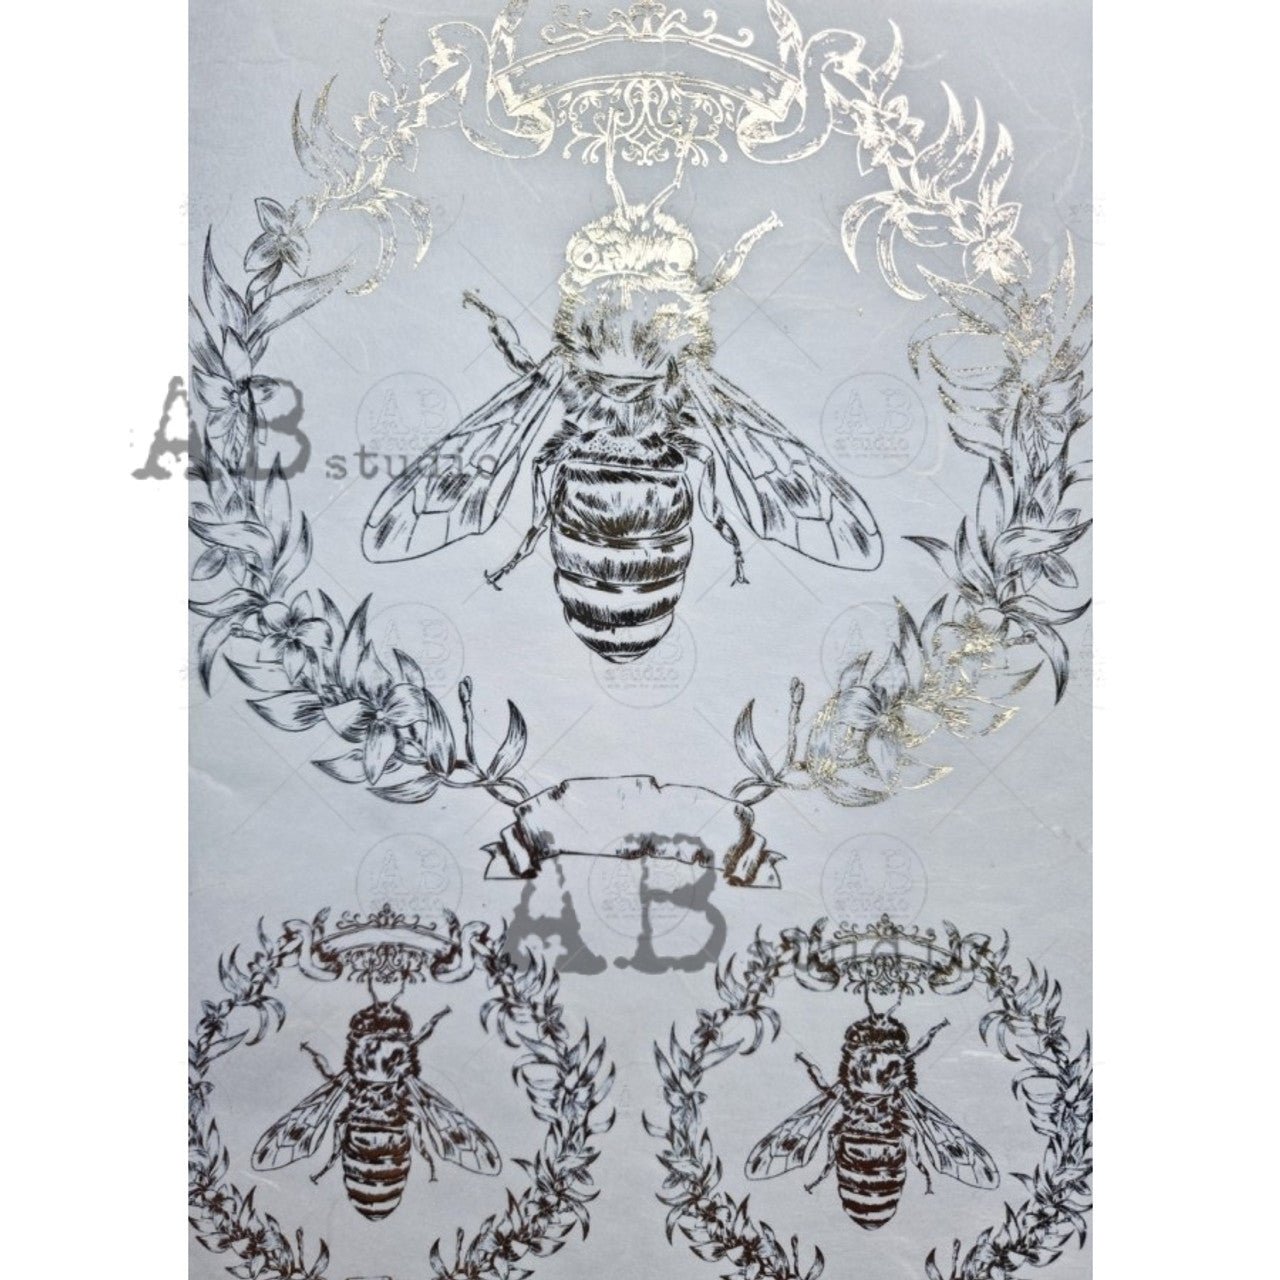 AB Studio - Gilded Royal Bee (Colour + Gold)